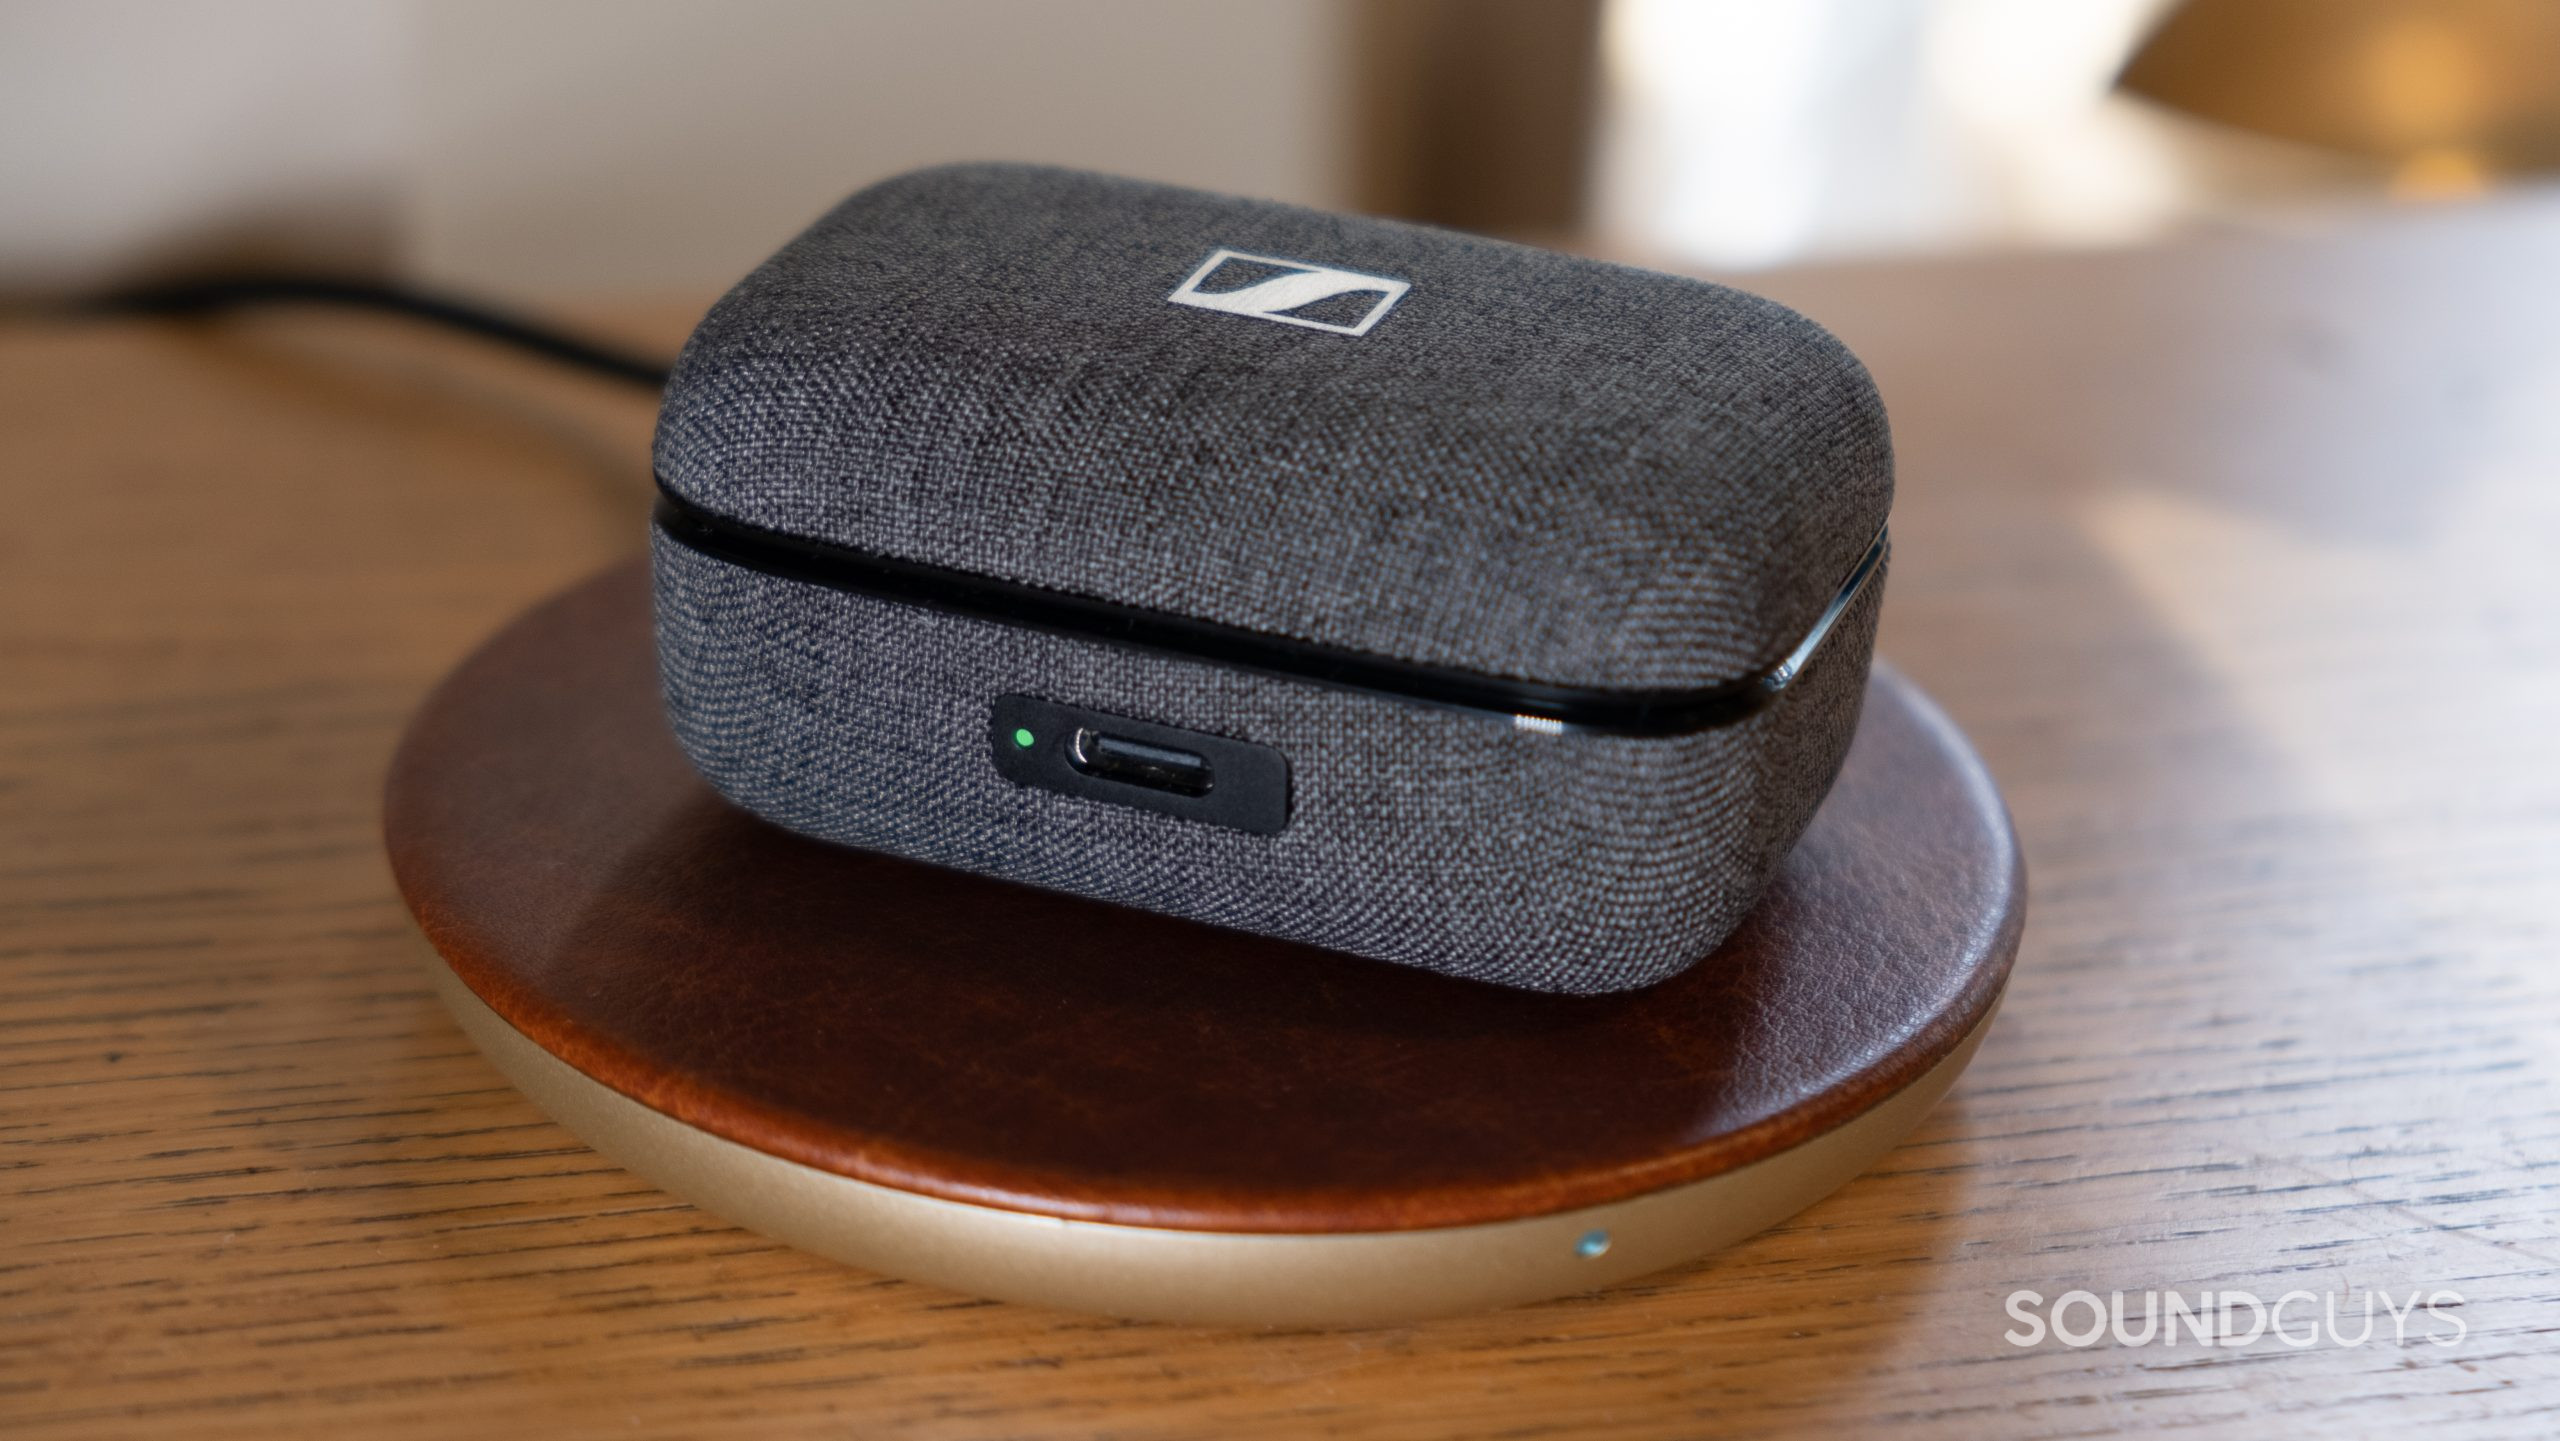 The closed battery case for the Sennheiser MOMENTUM True Wireless 3 charges on a wireless charging pad.